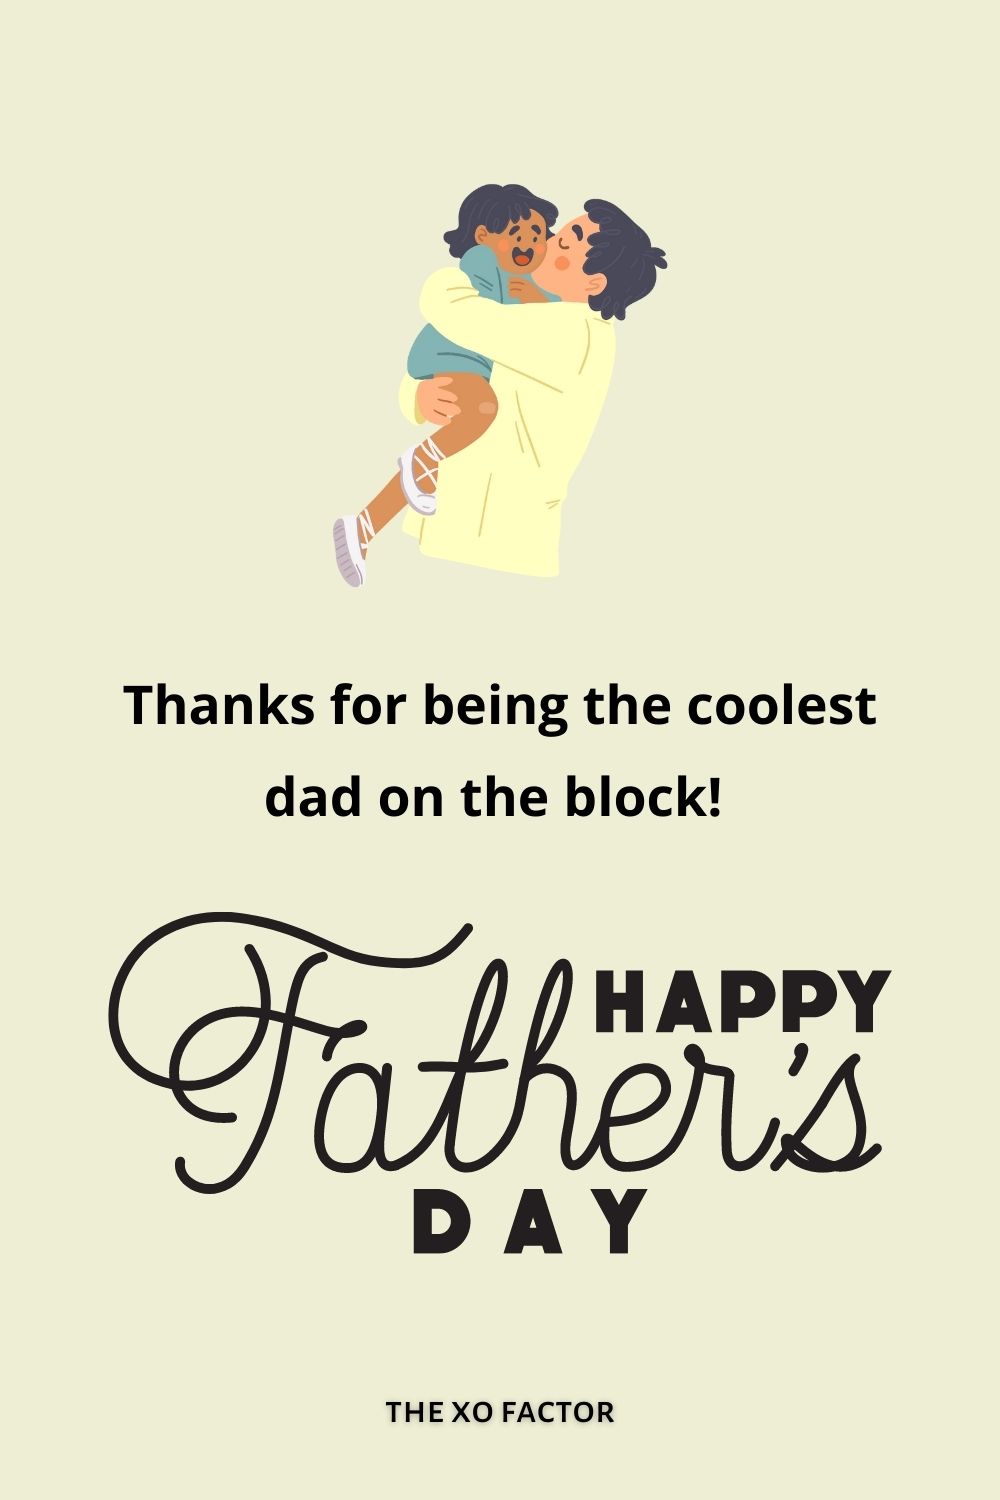 Thanks for being the coolest dad on the block! Happy Father’s day!